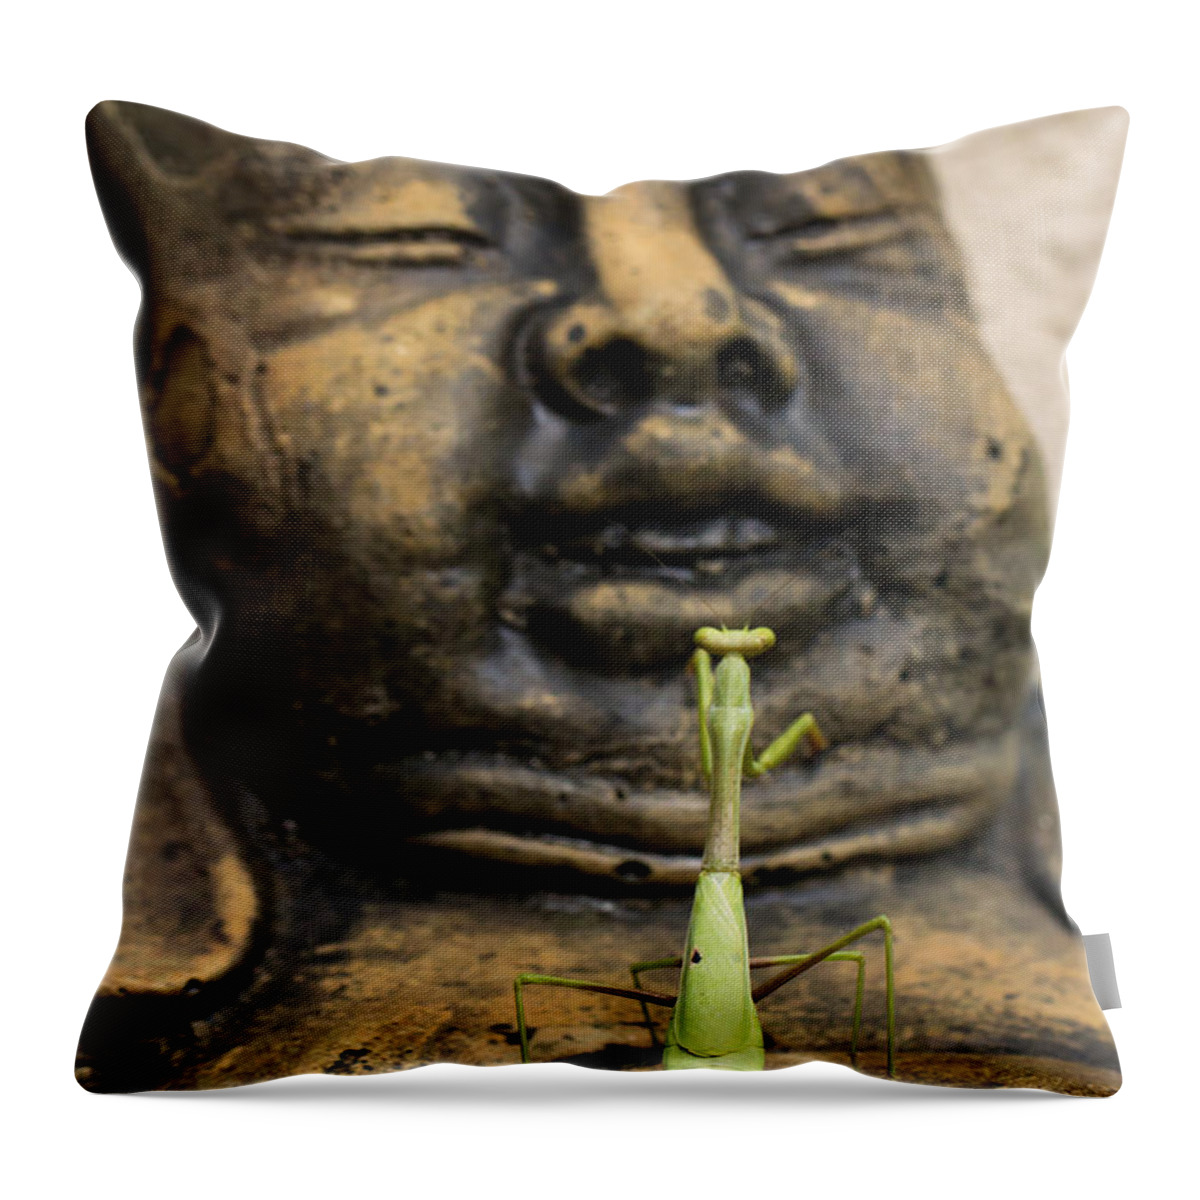 Seabrook Island Throw Pillow featuring the photograph Praying by Patricia Schaefer